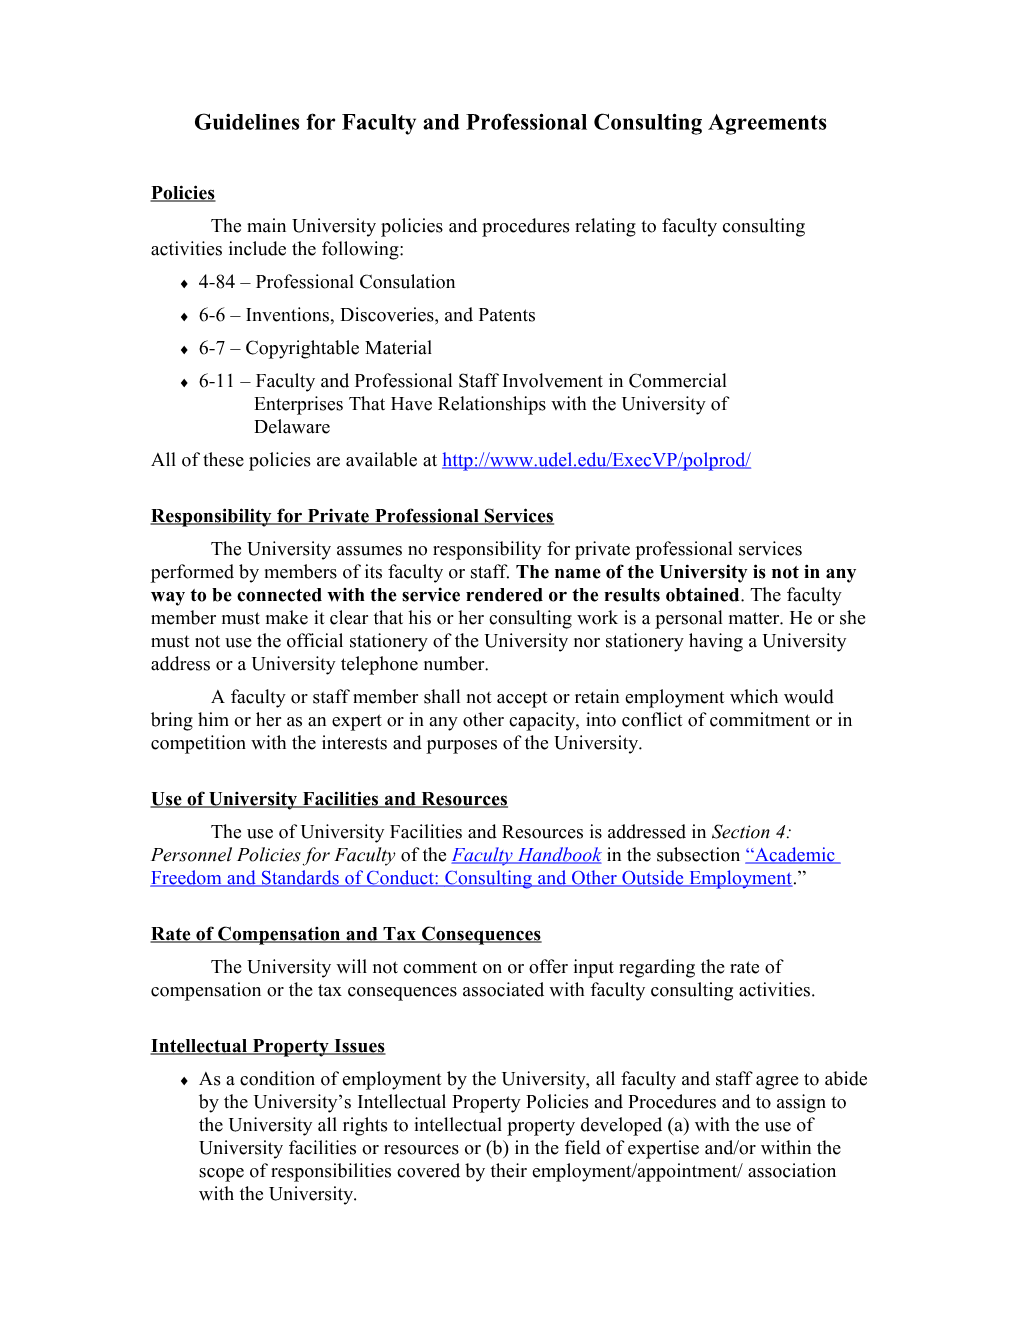 Guidelines for Faculty and Professional Consulting Agreements